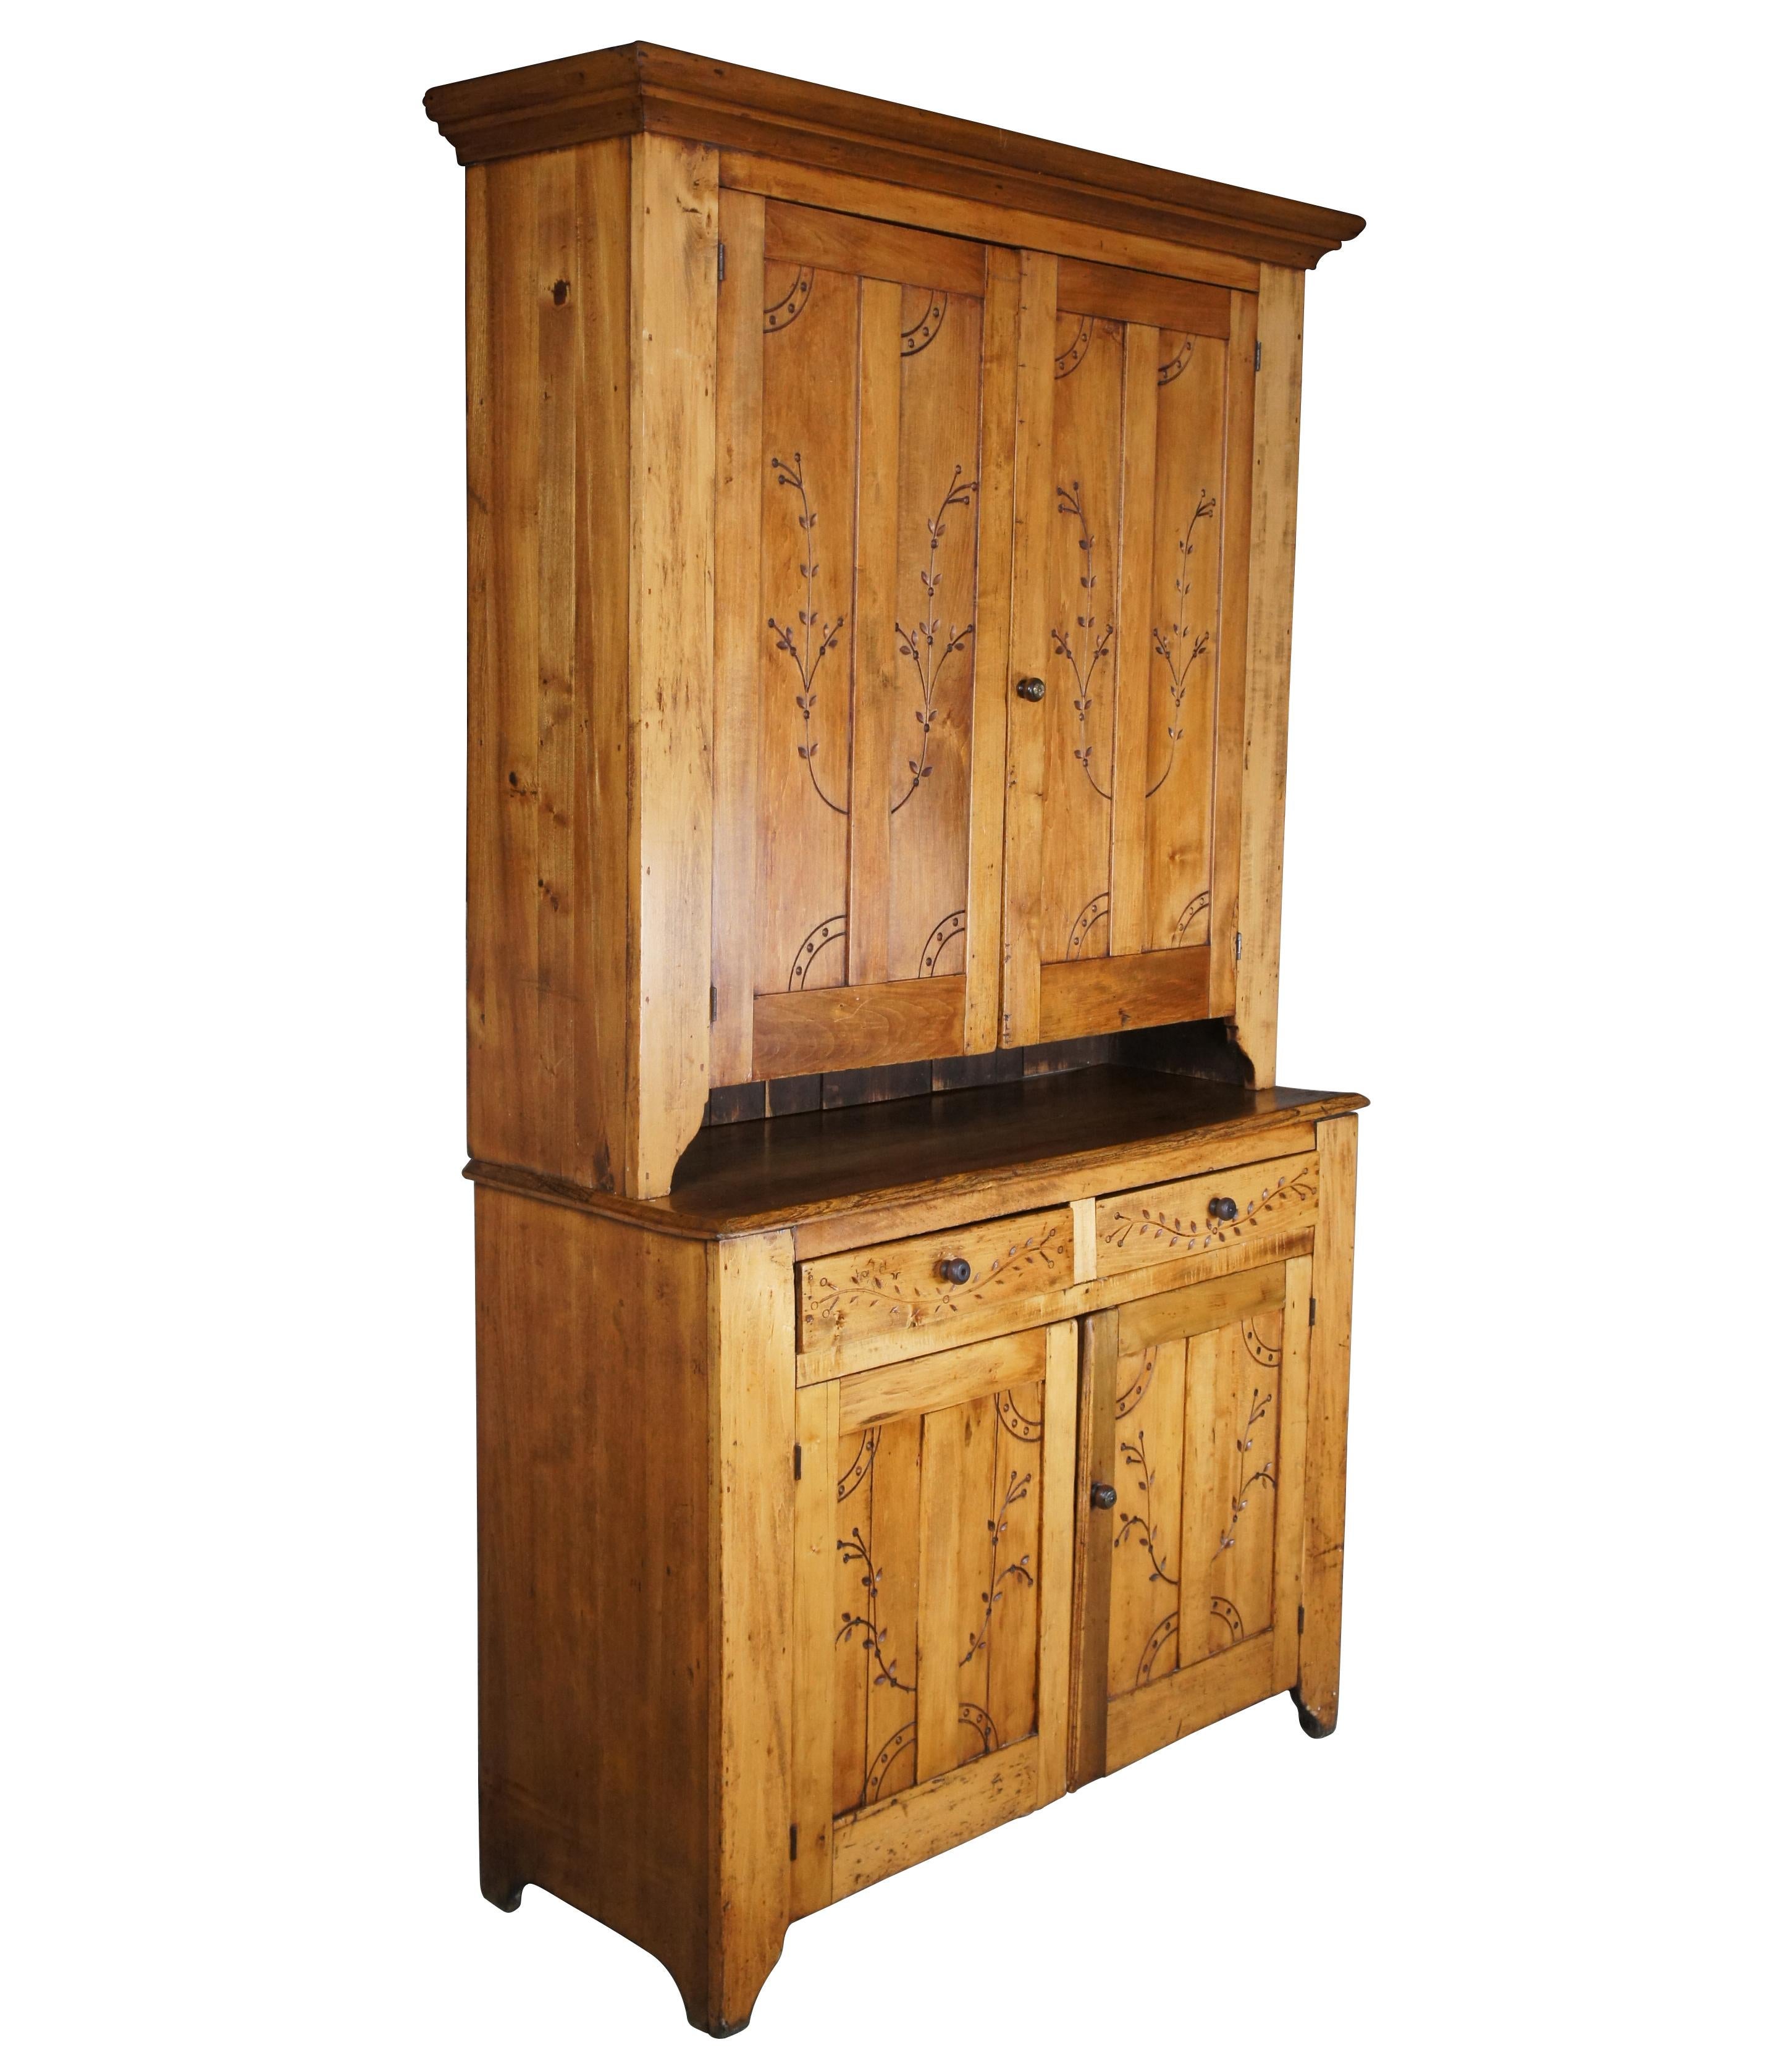 Early 20th century American blind door step back cupboard. In the manner of Pennsylvania Dutch. Made from oak with foliate carved doors and drawers. Opens to three shelves with plate grooves on the hutch and one large shelf on the base for accessory